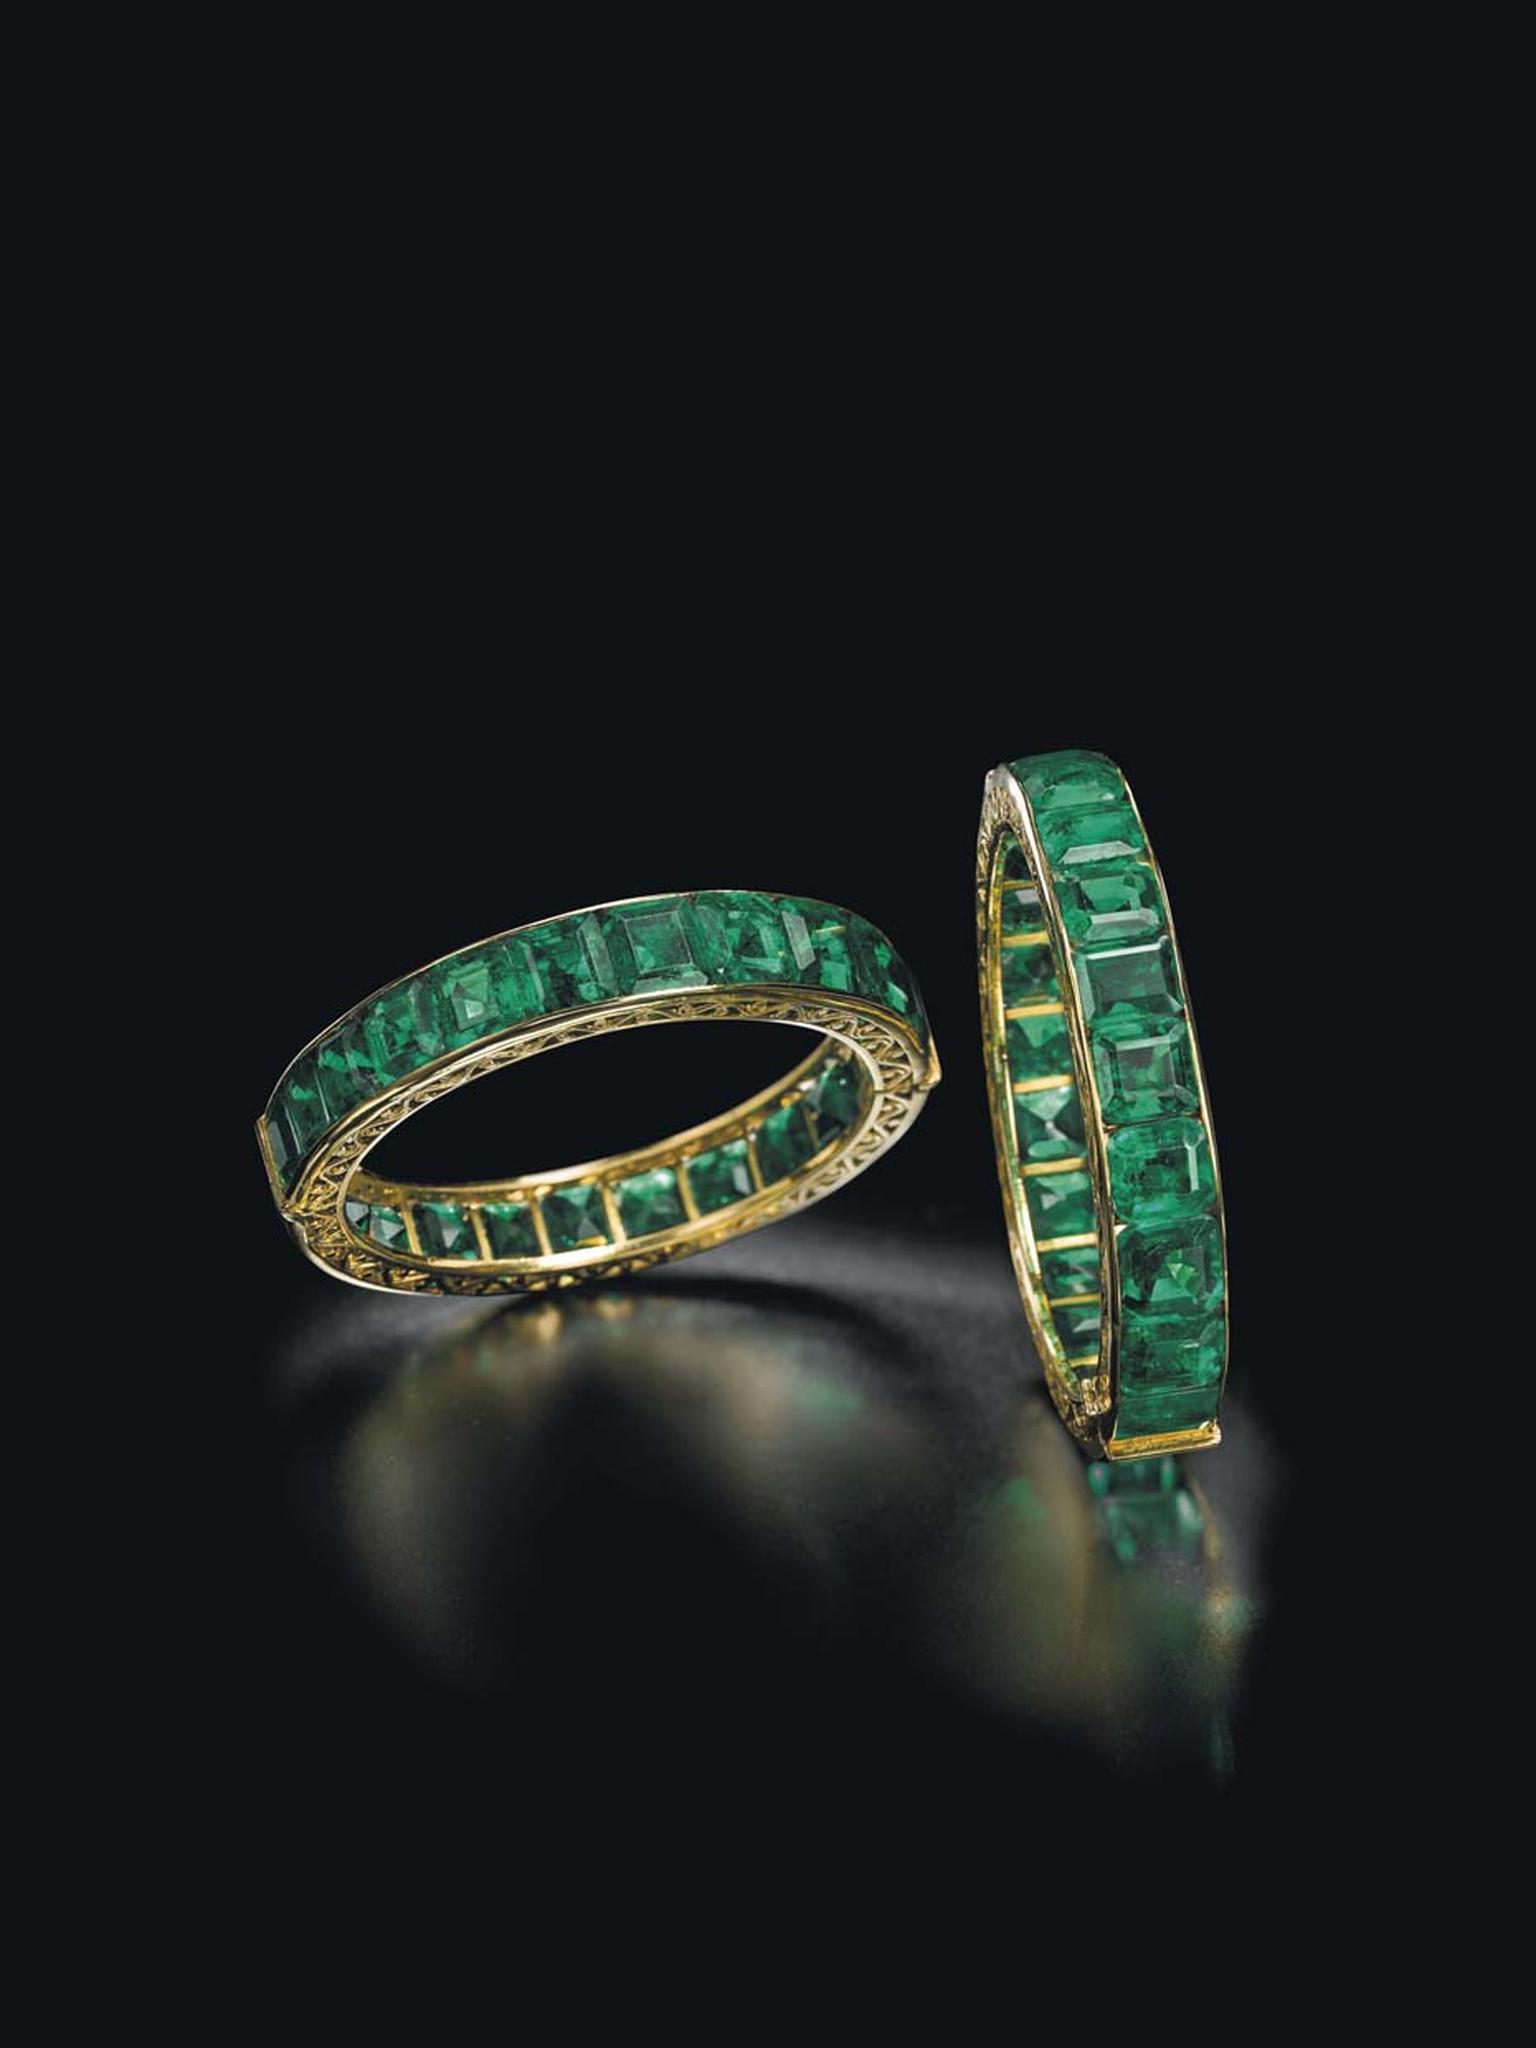 This pair of emerald bracelets, once owned by an Indian Royal family renowned for its enviable collection of emerald jewellery, sold for $1.74 million at Christie's Magnificent Jewels Sale in Geneva.